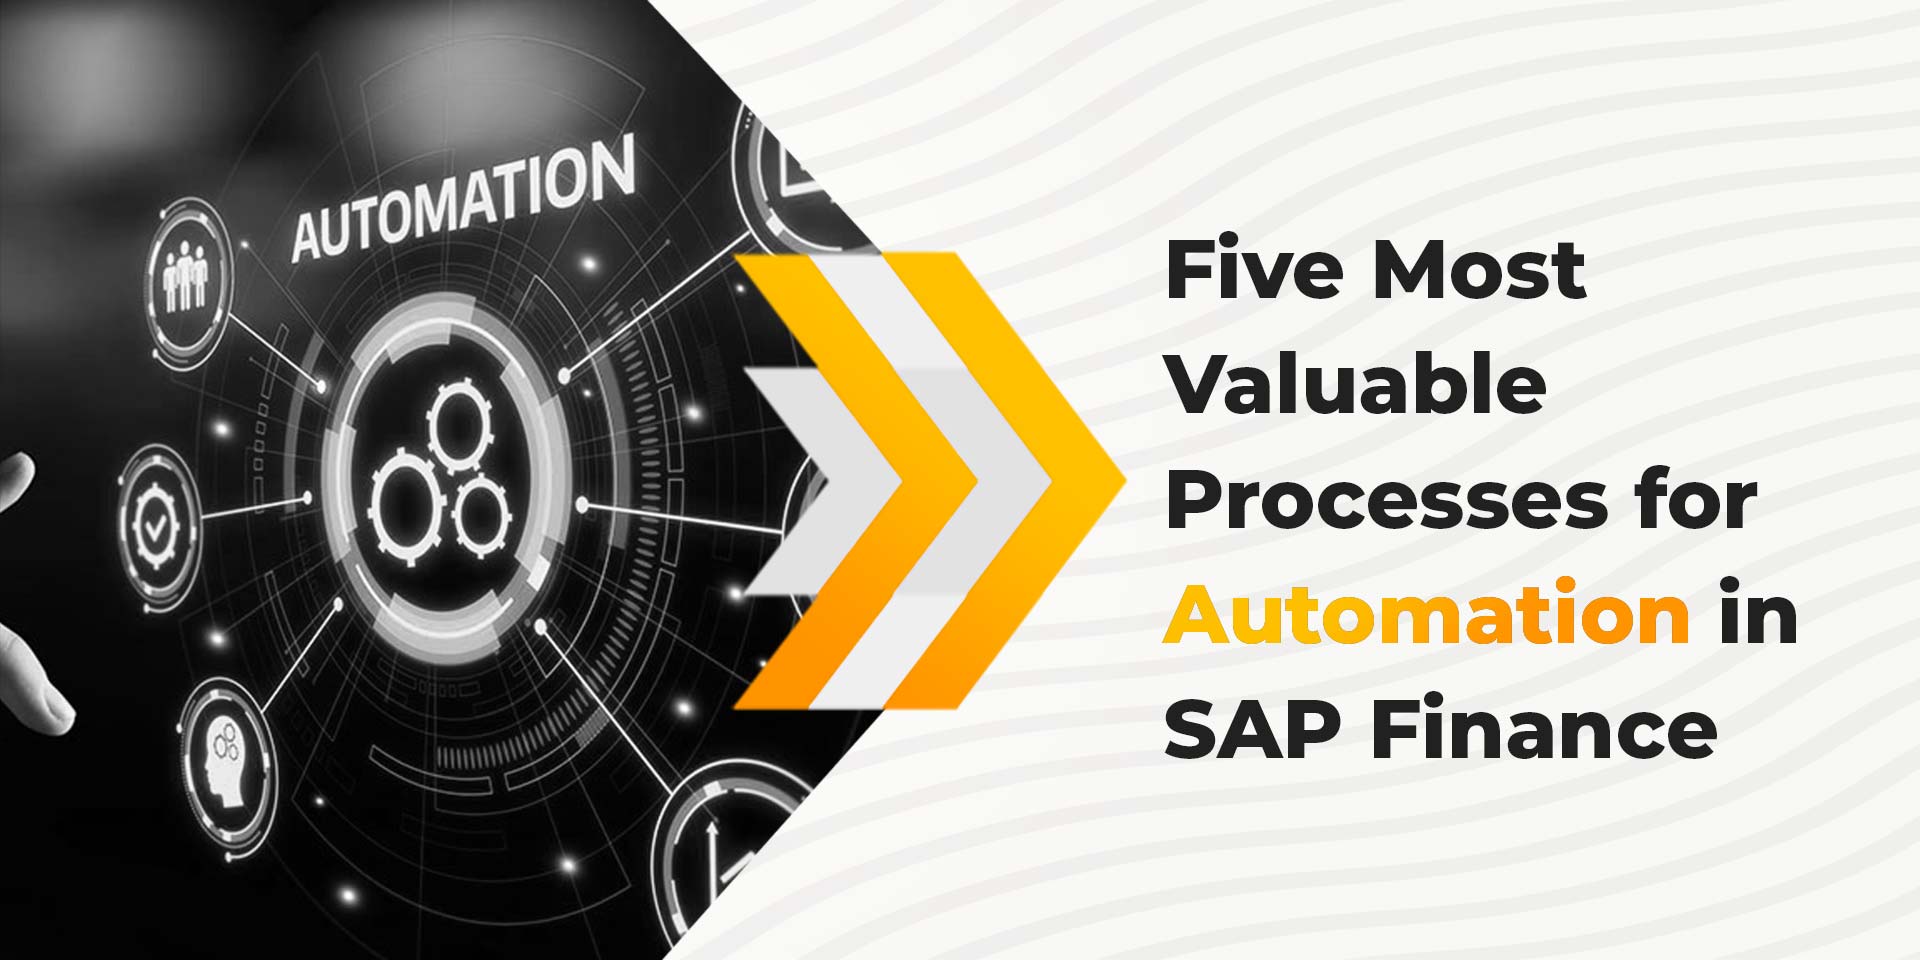 Five Most Valuable Processes for Automation in SAP Finance